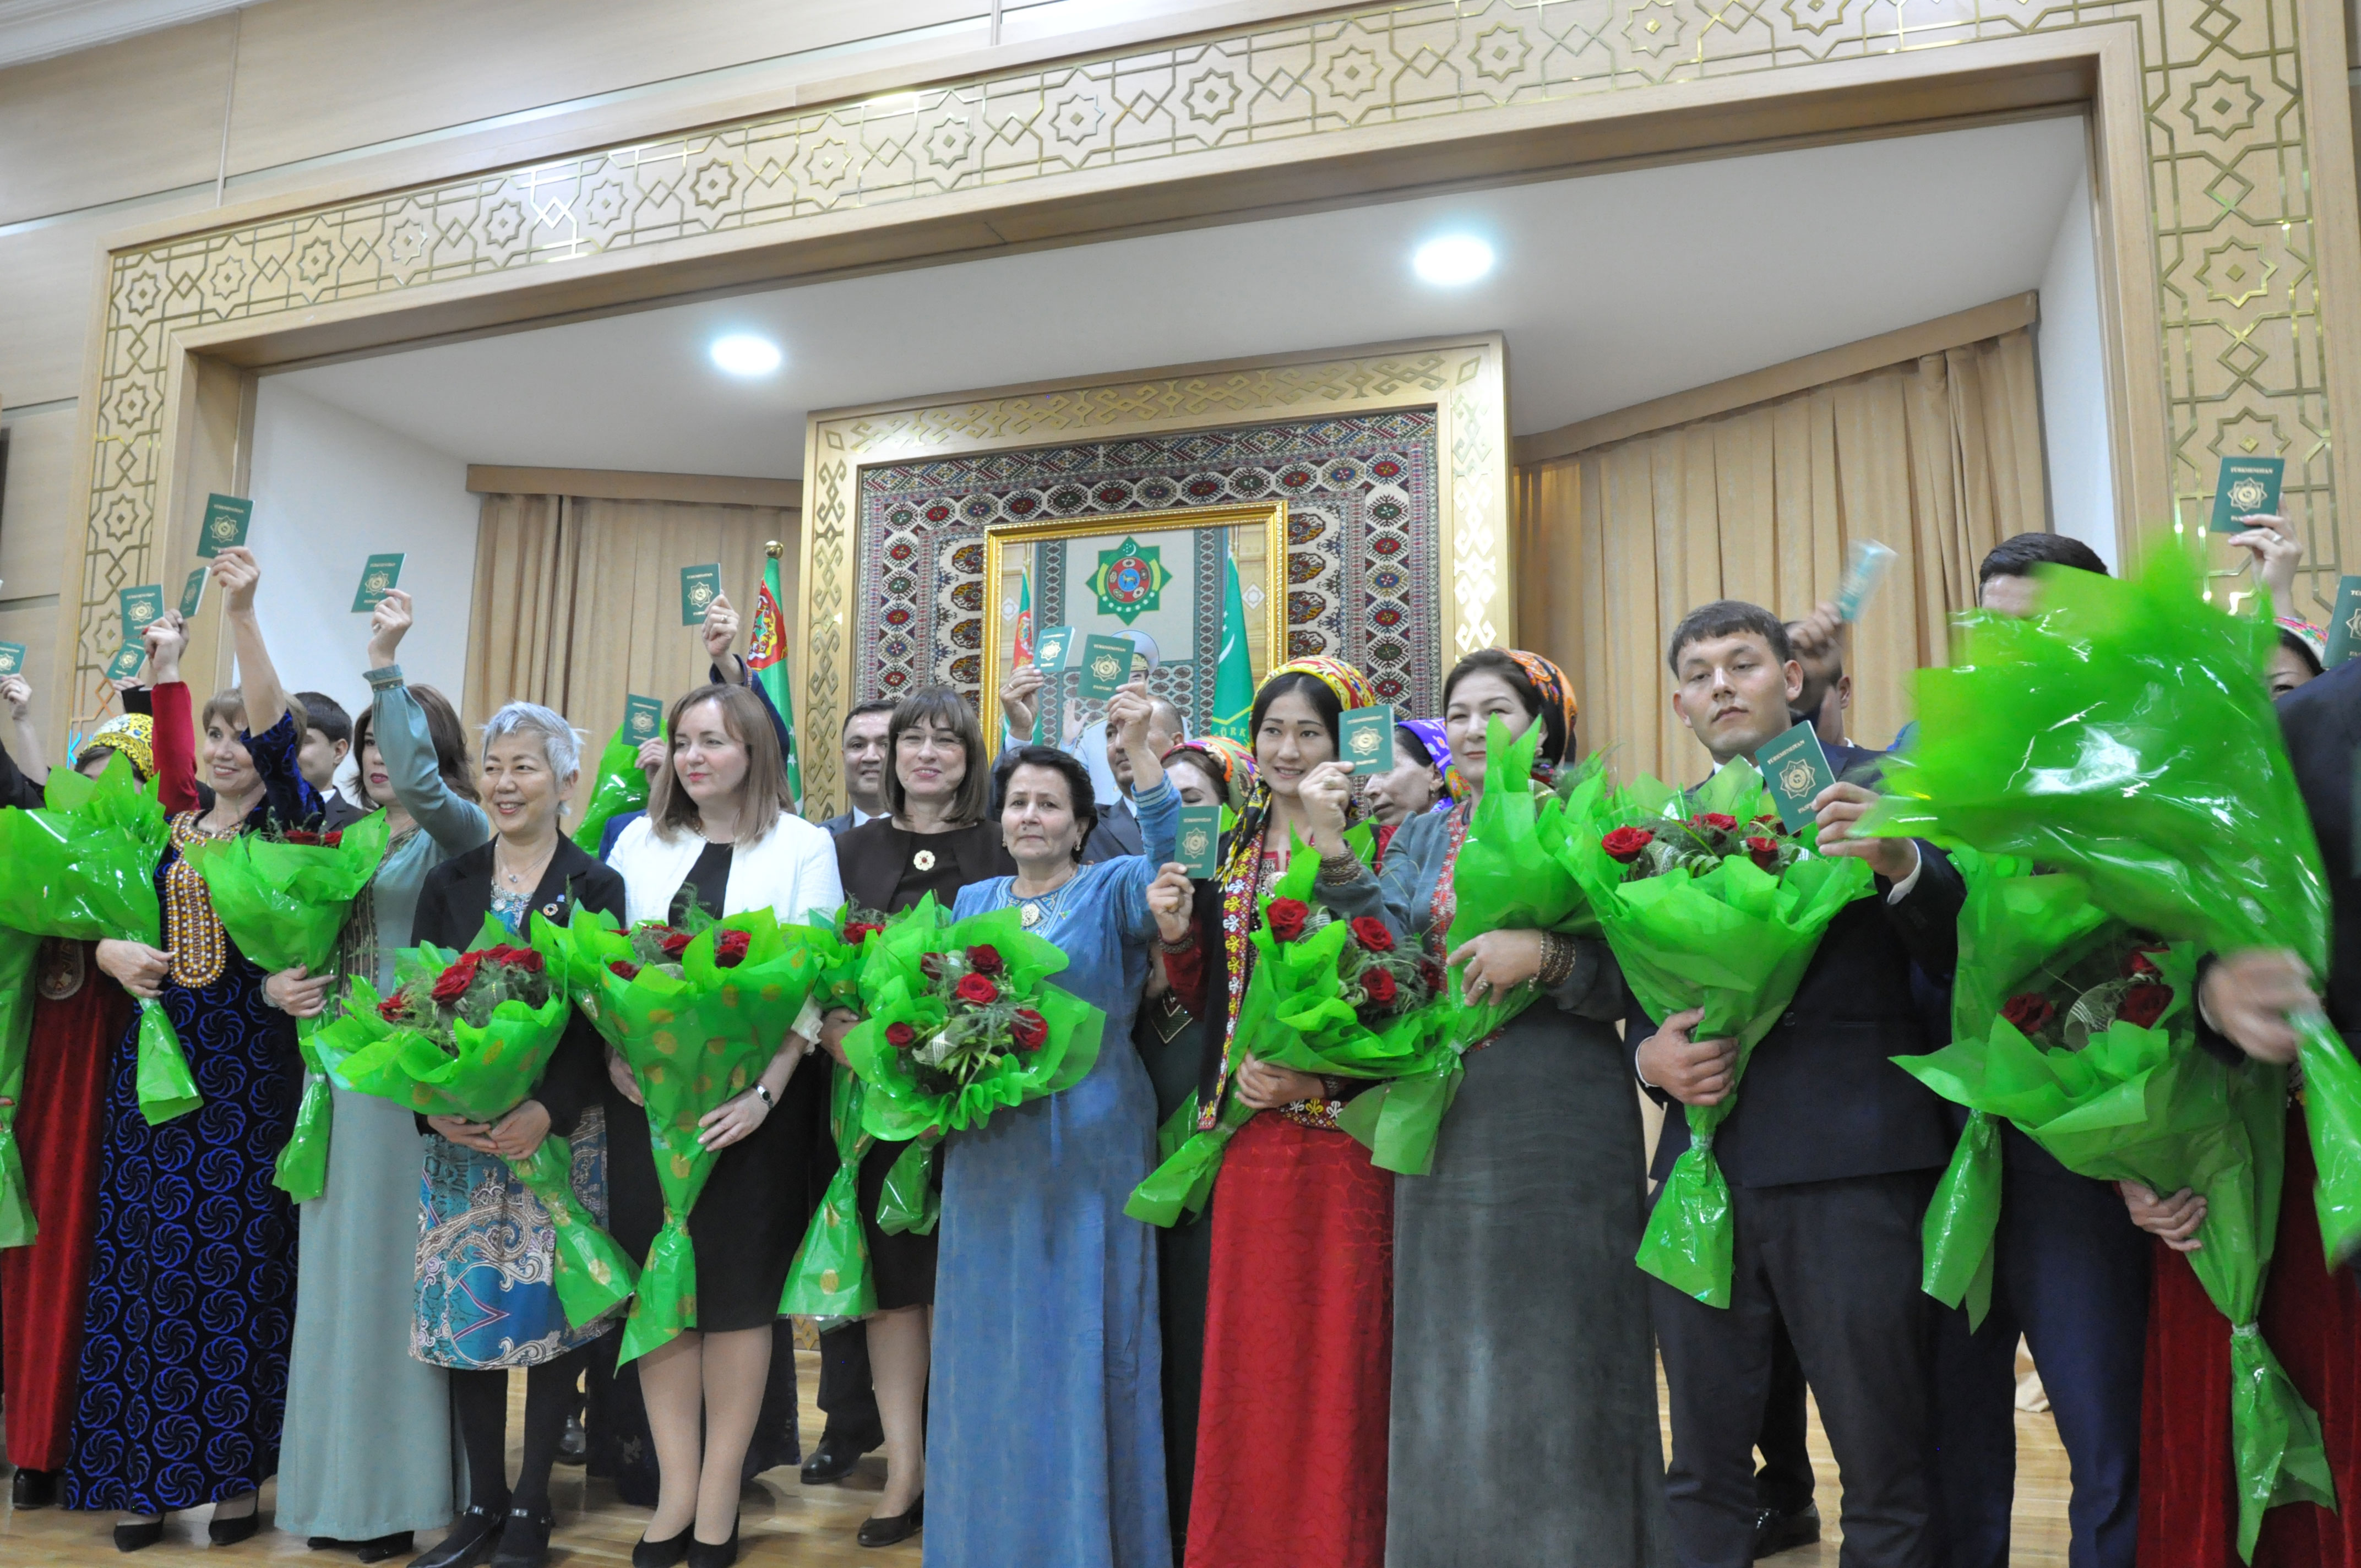  Turkmenistan continues to play a leading role in ending statelessness in Central Asia